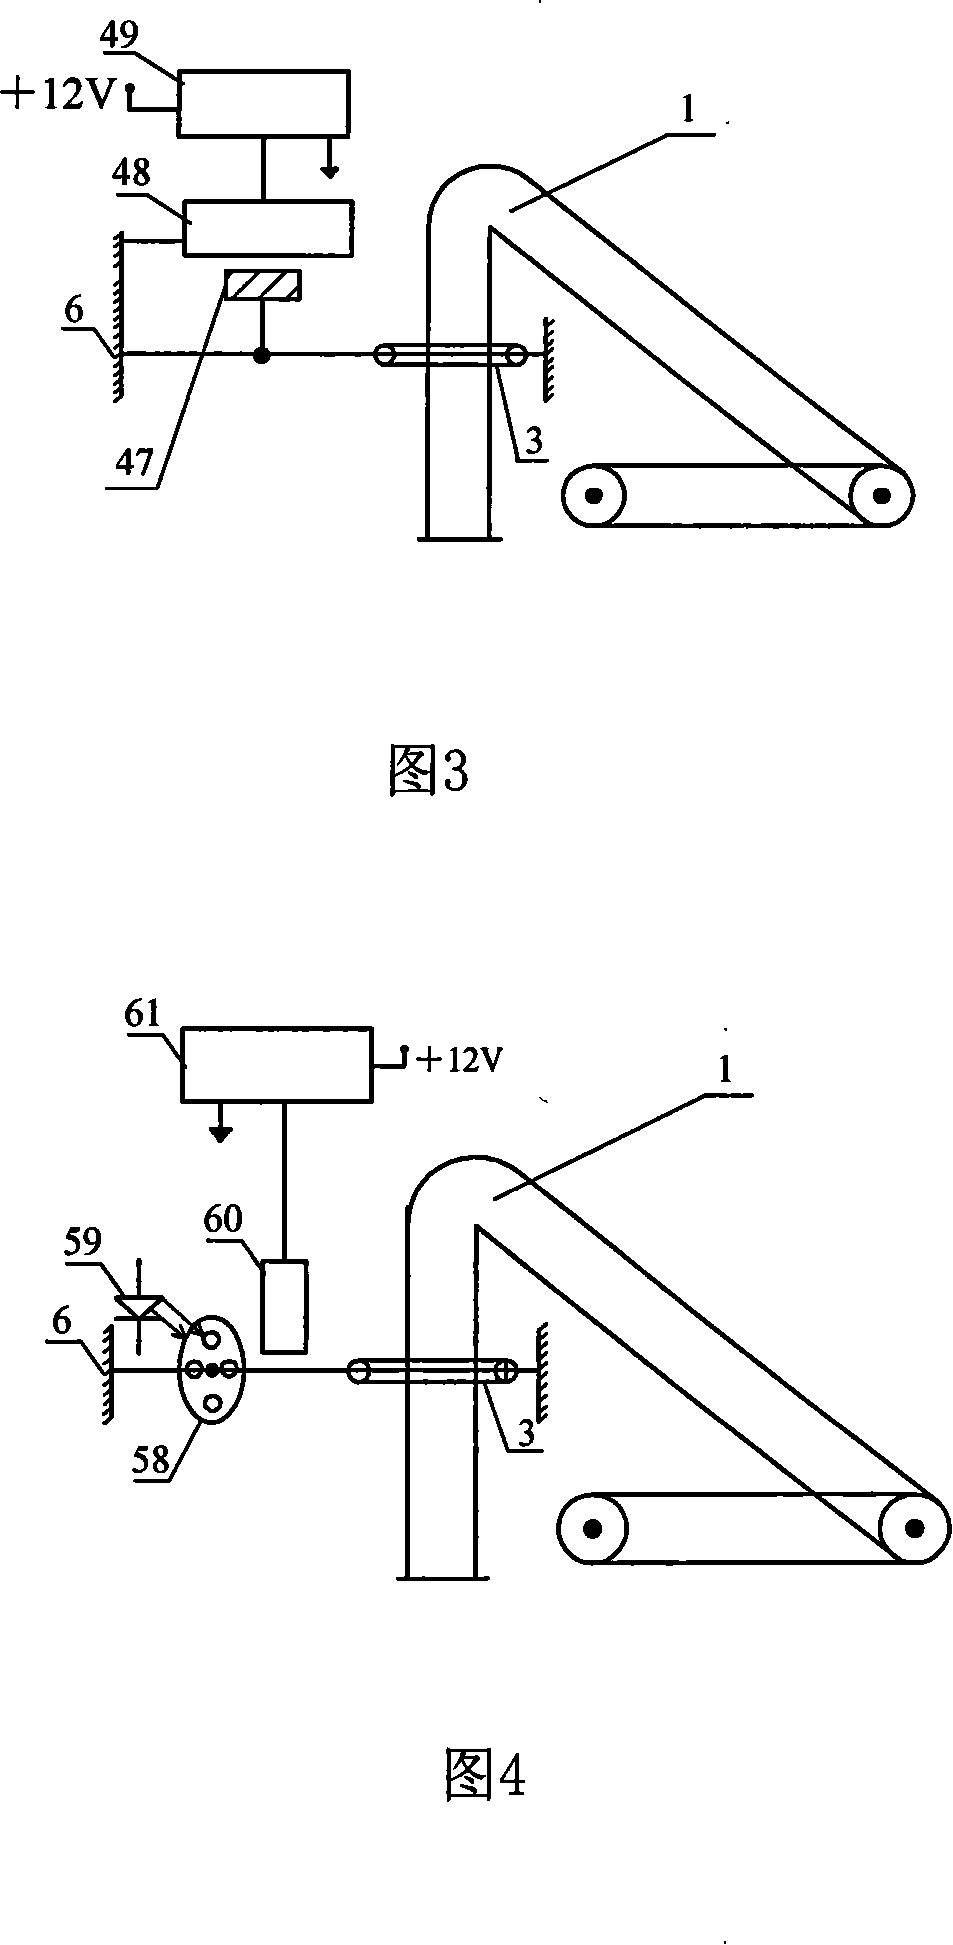 Driving monitoring device for motor-driven vehicle